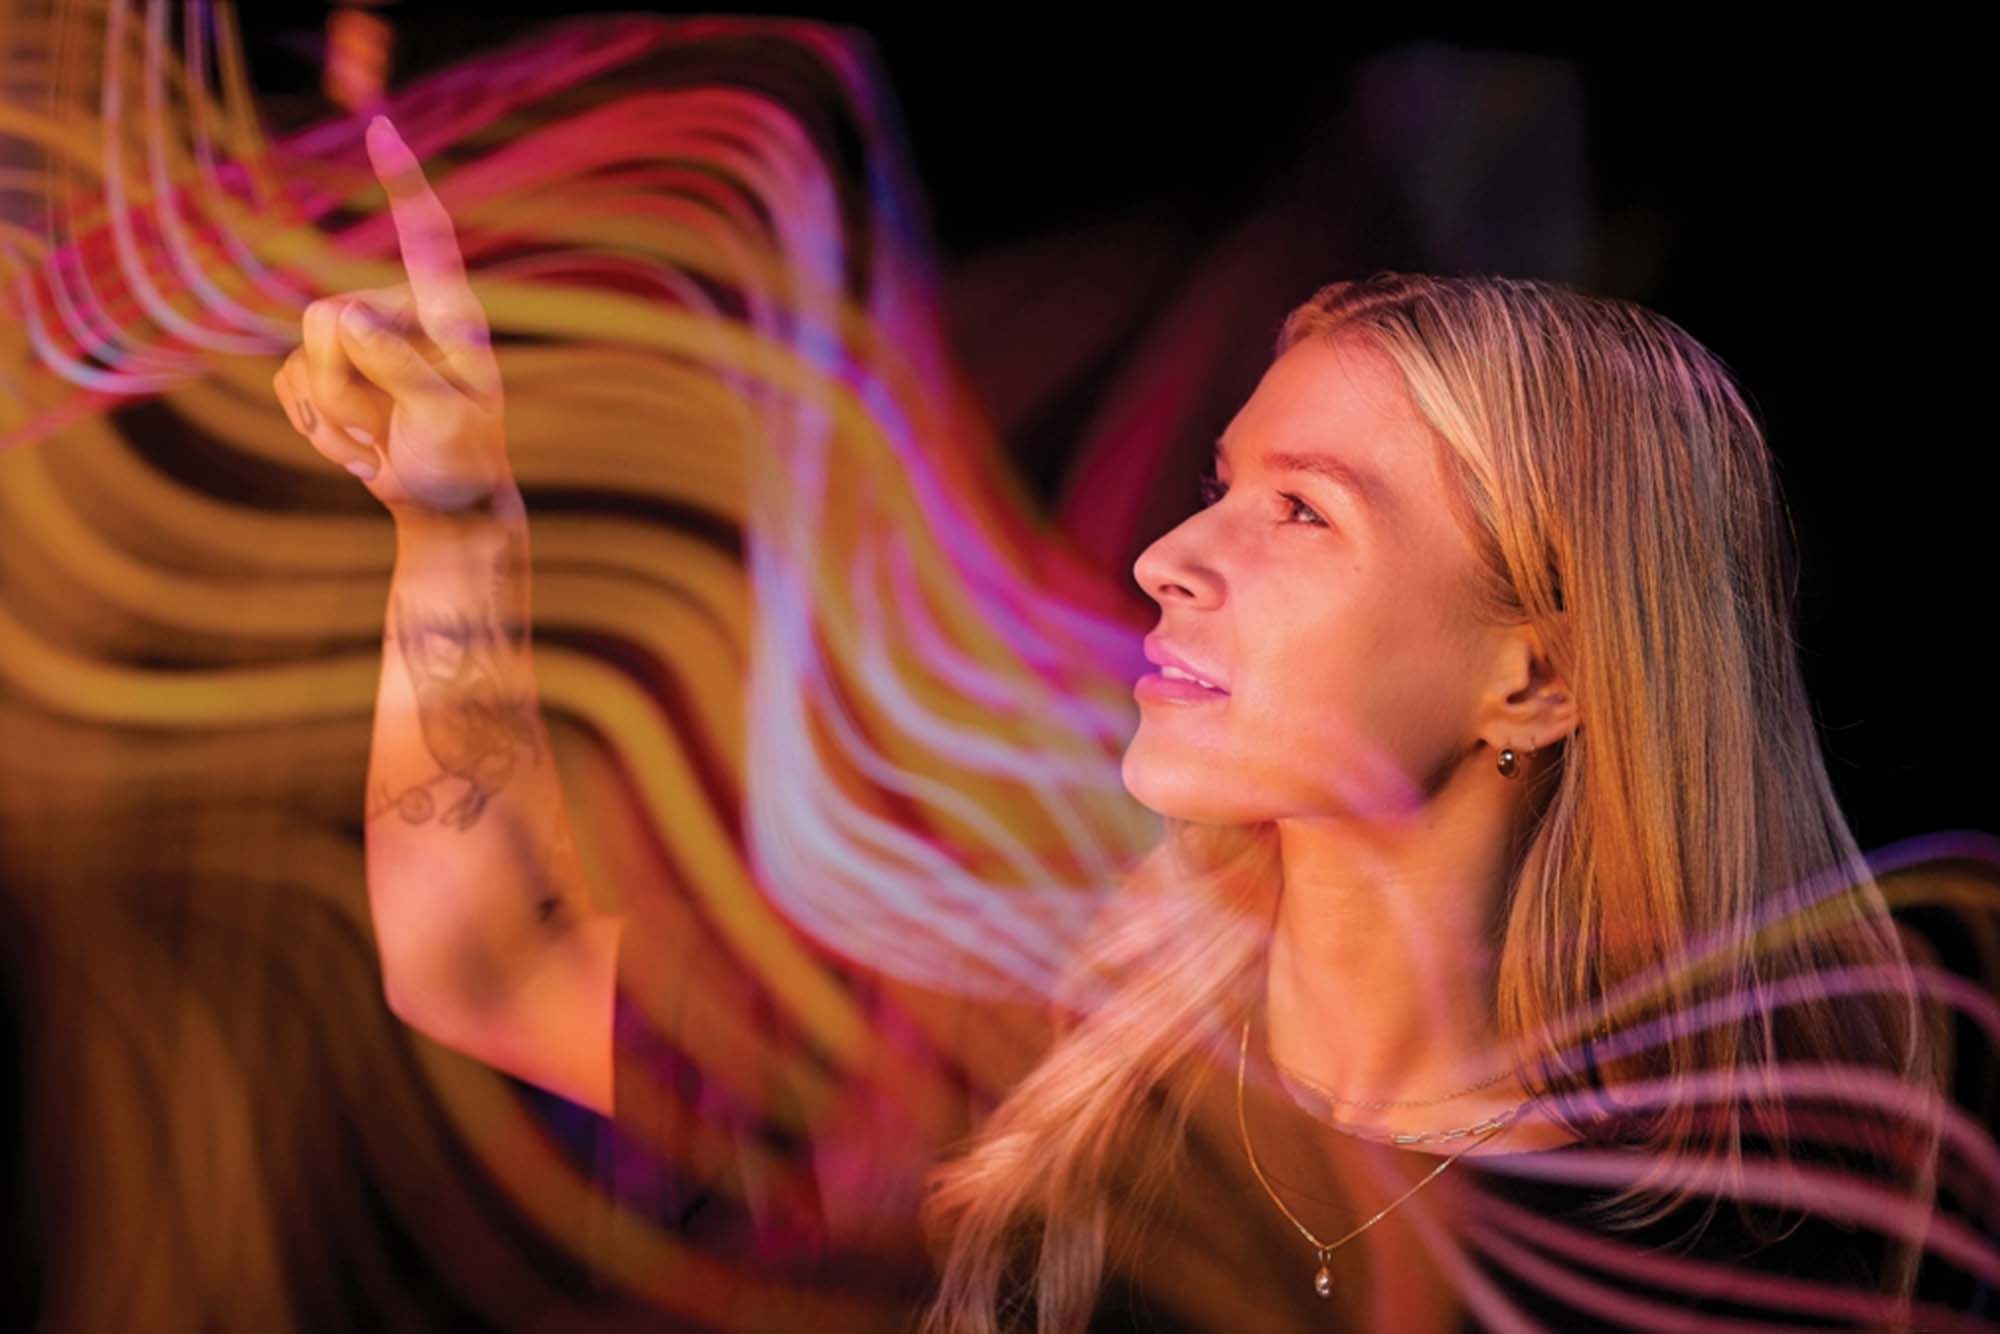 A woman is captured in a moment of wonder, her profile illuminated by the vibrant light trails swirling around her hand.